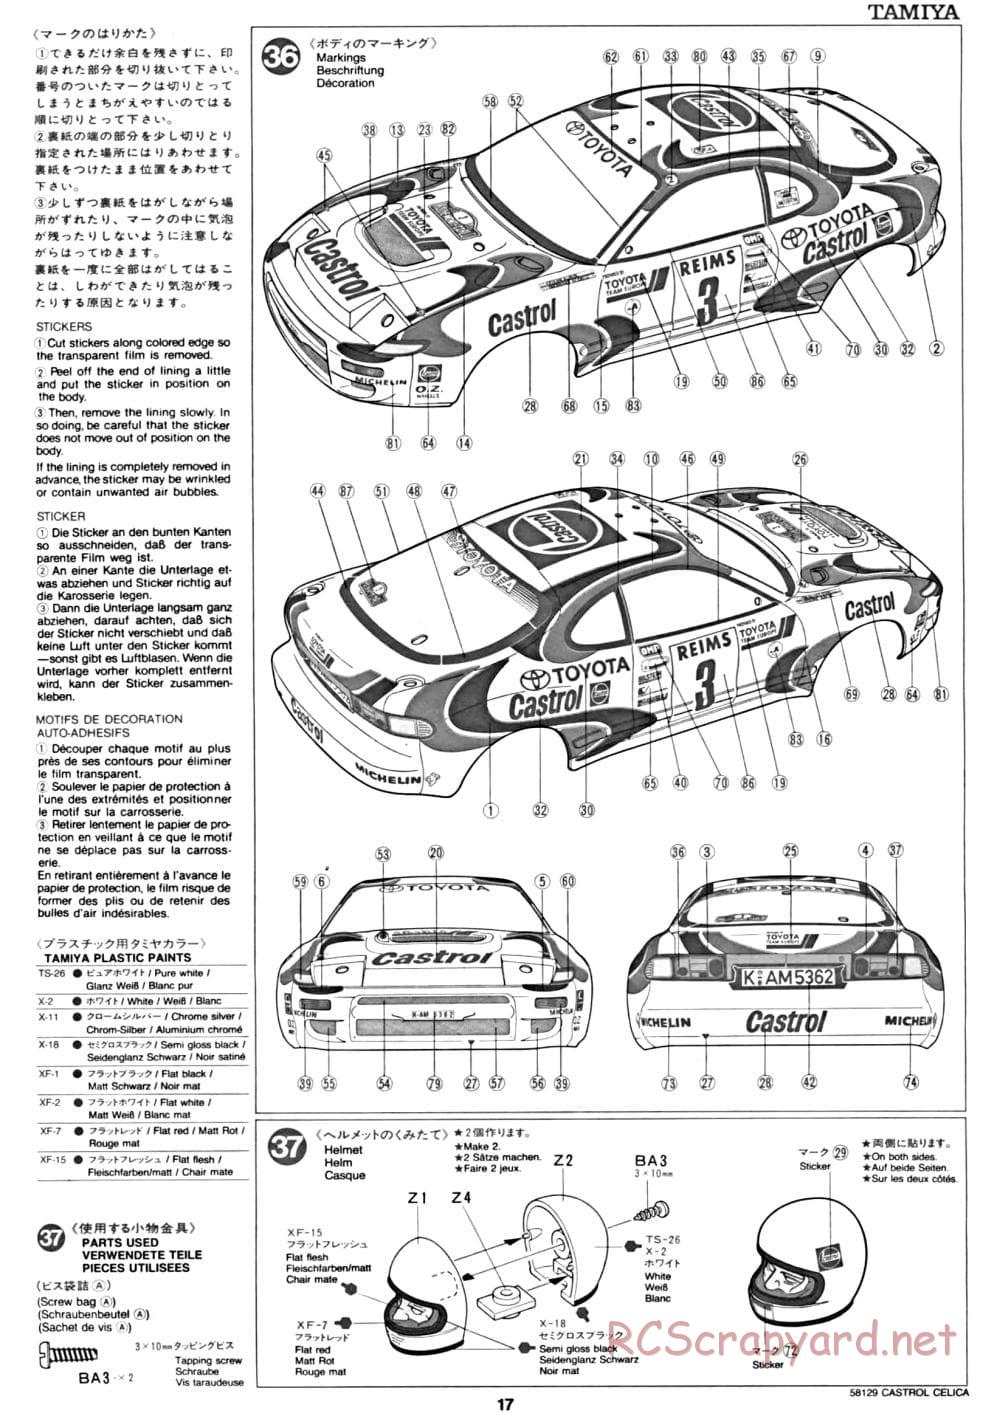 Tamiya - Castrol Celica 93 Monte-Carlo - TA-02 Chassis - Manual - Page 17